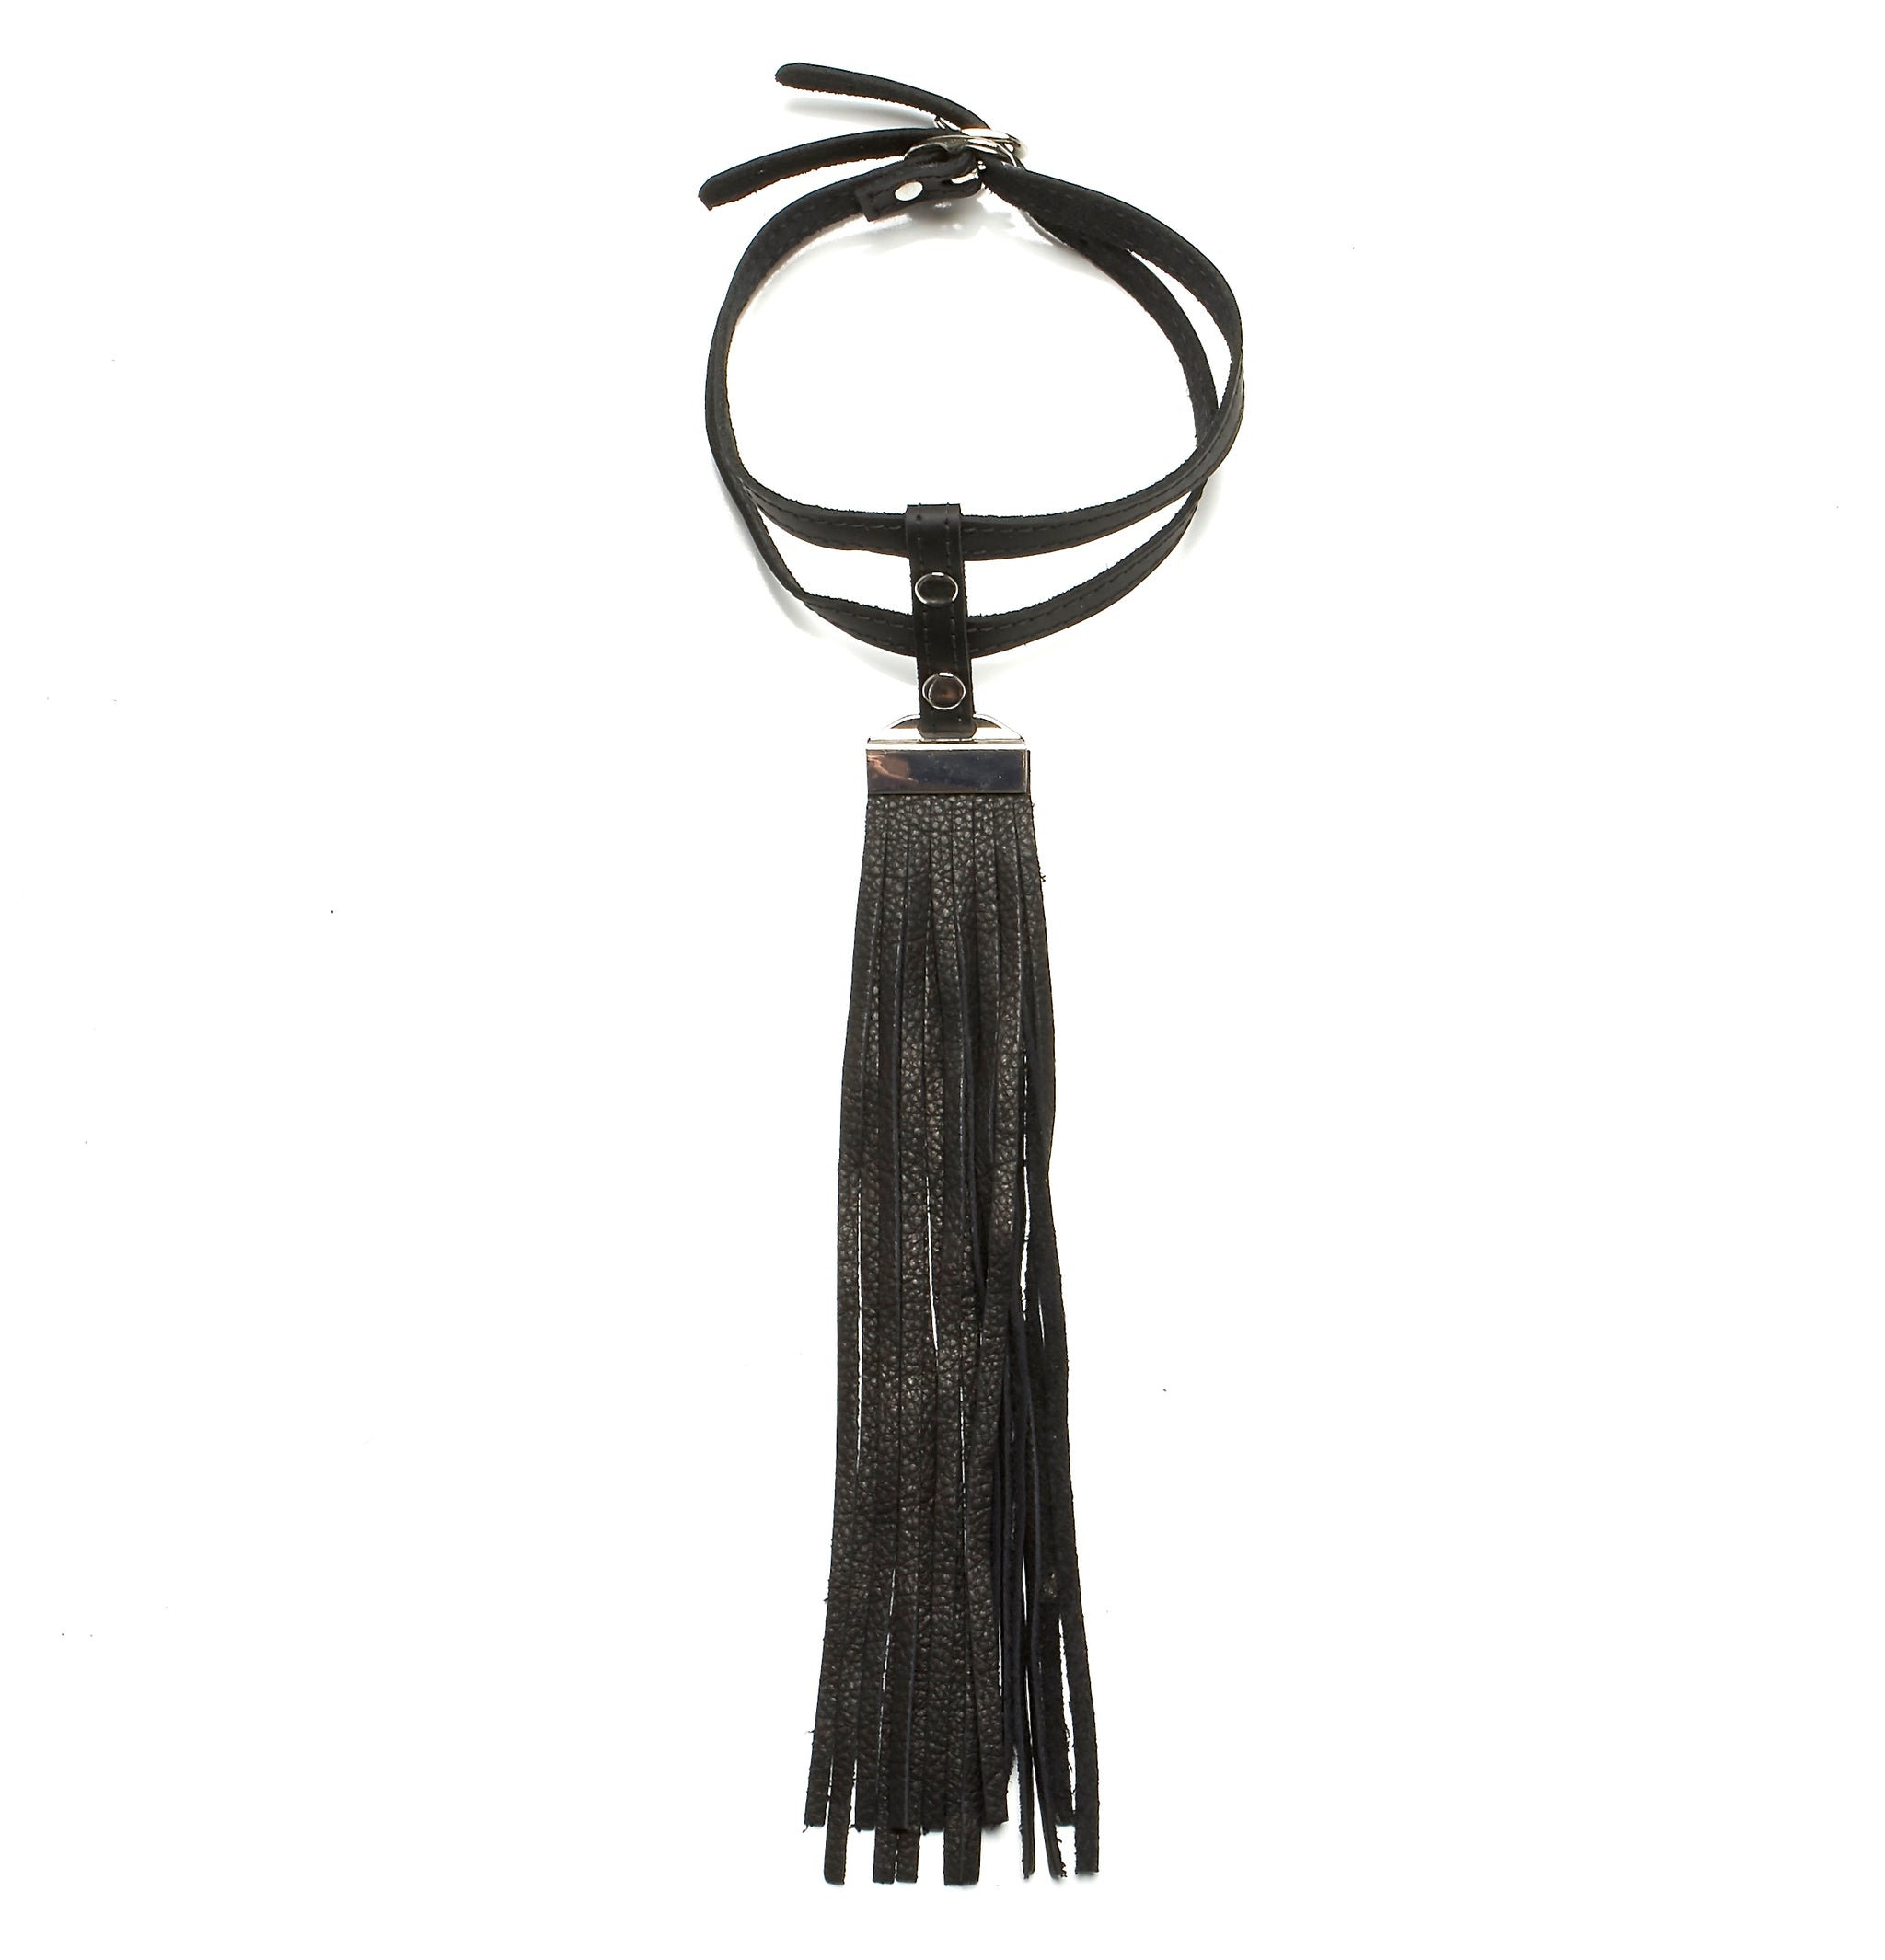 DOUBLE LEATHER CHOKER NECKLACE WITH LONG DEERSKIN LEATHER FRINGE by nyet jewelry